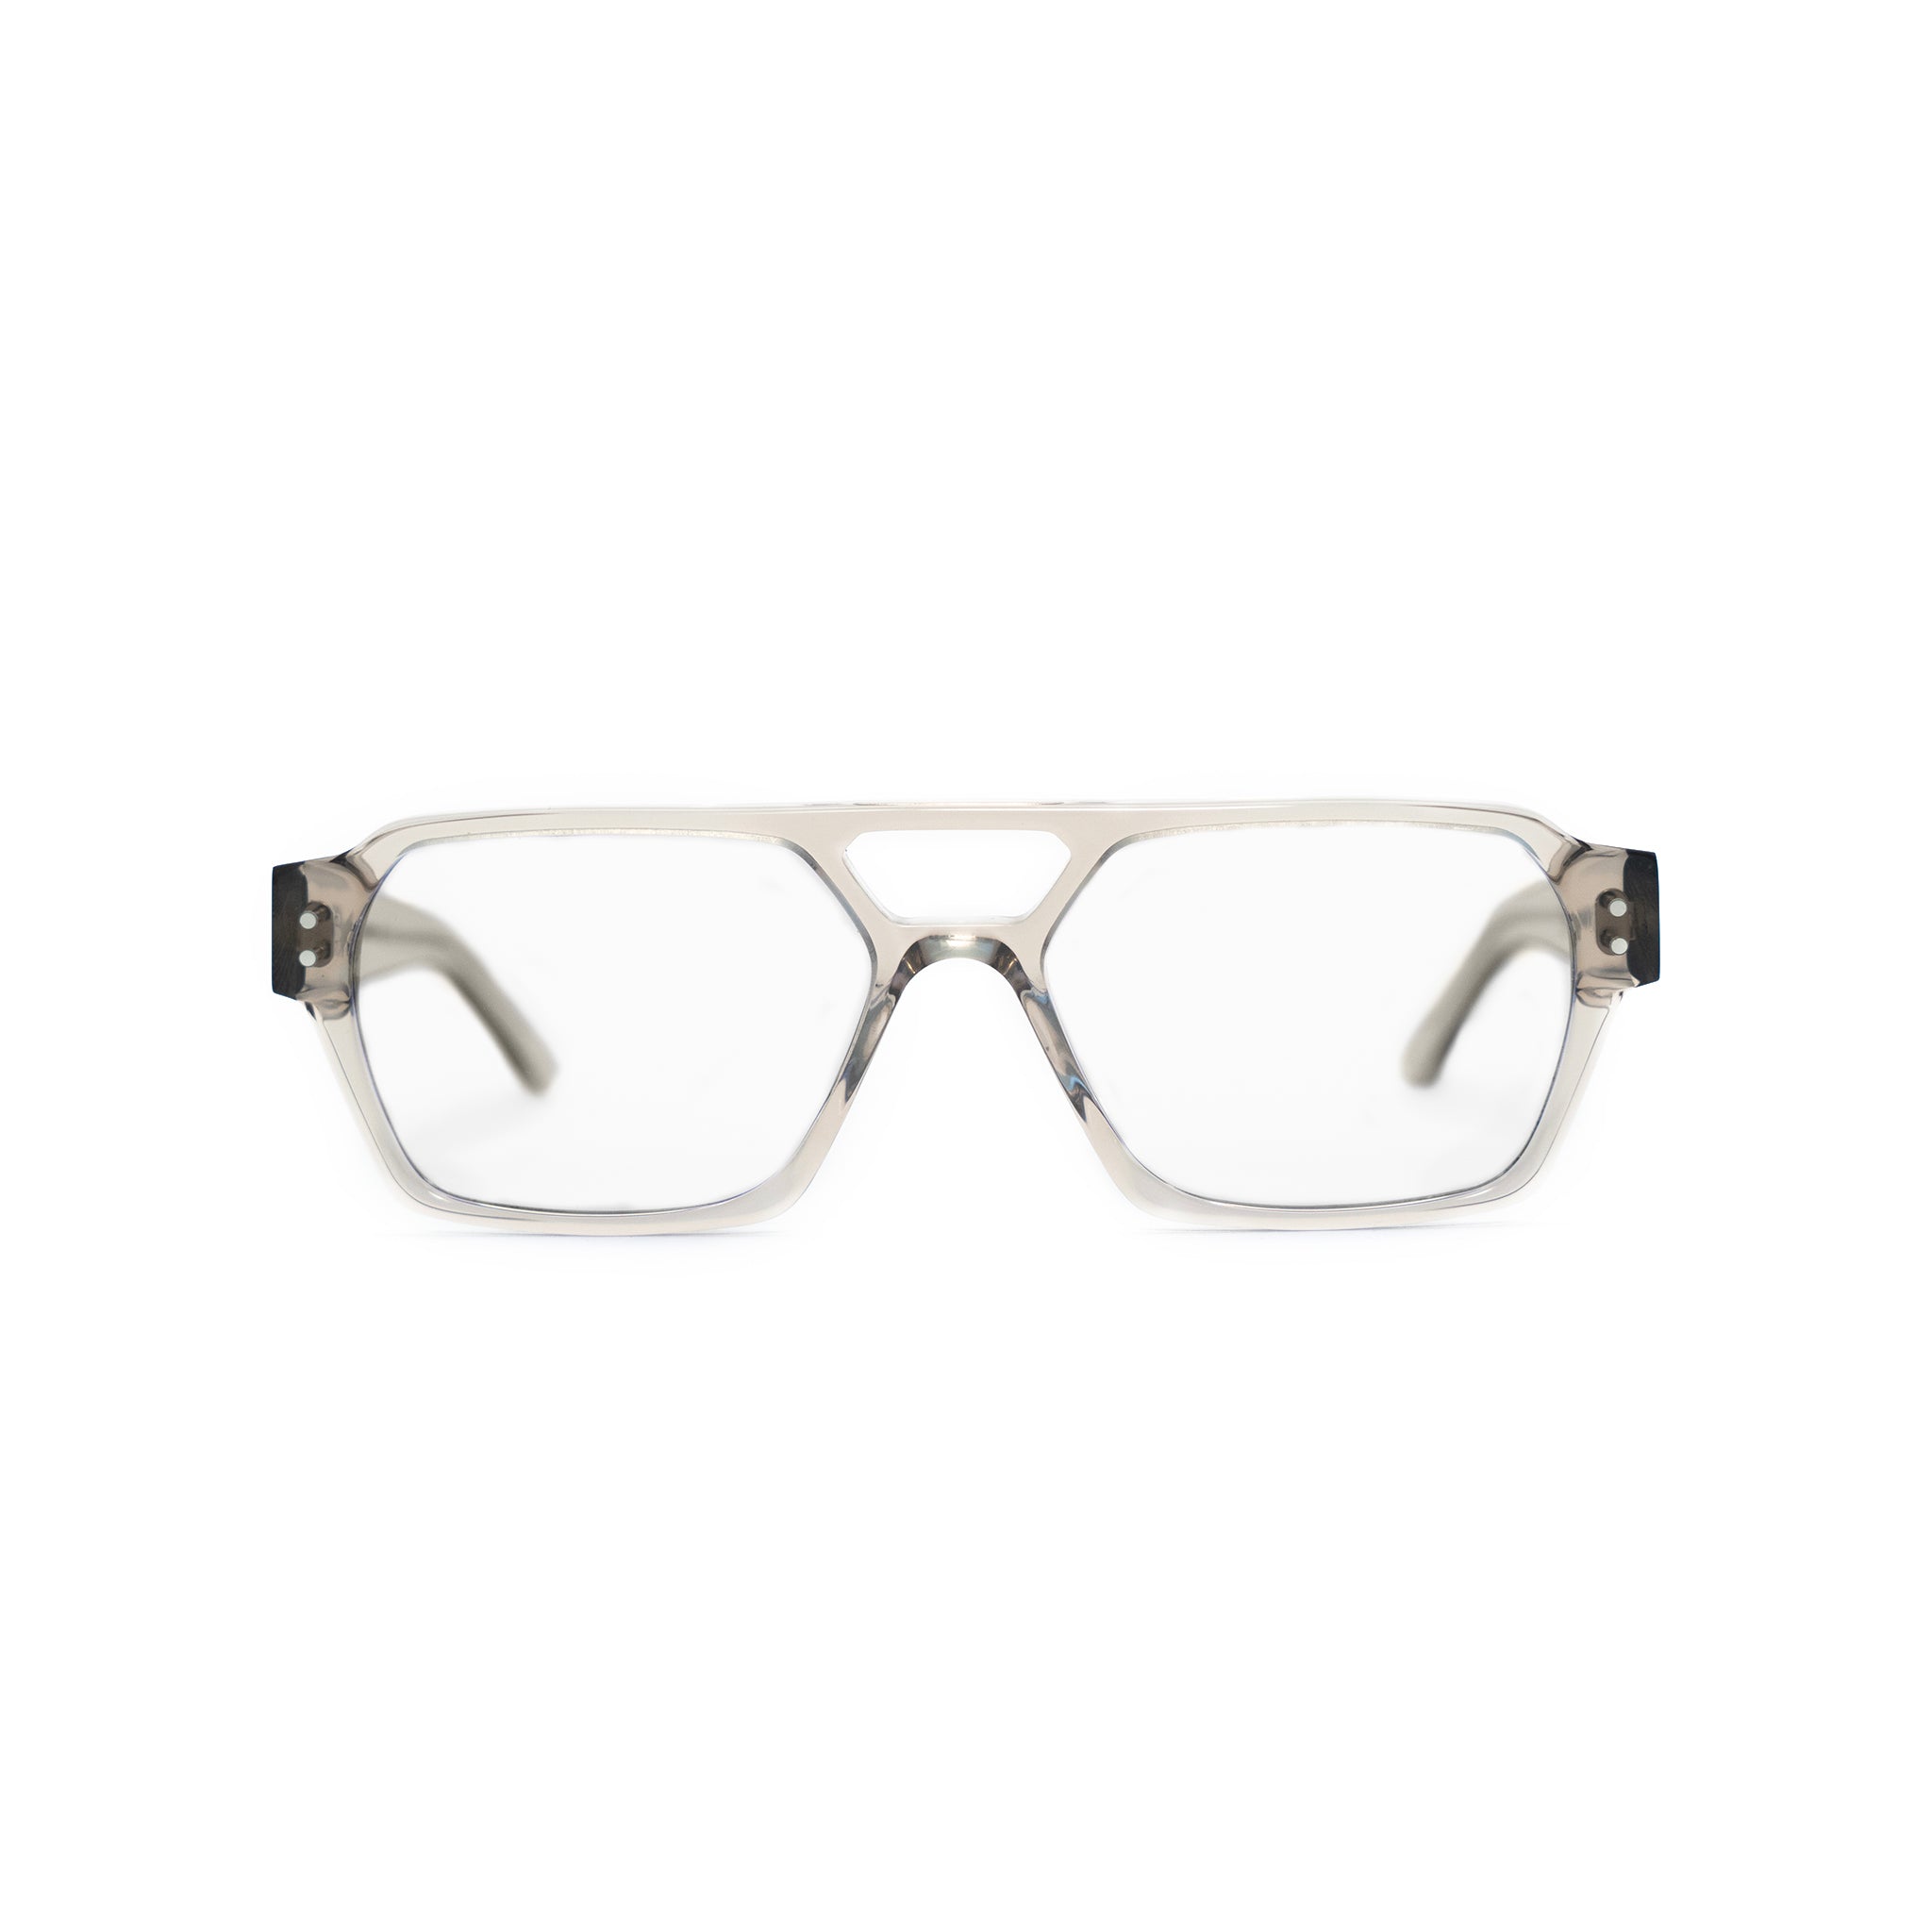 Ego optical glasses in transparent grey from Ameos Eyewear.